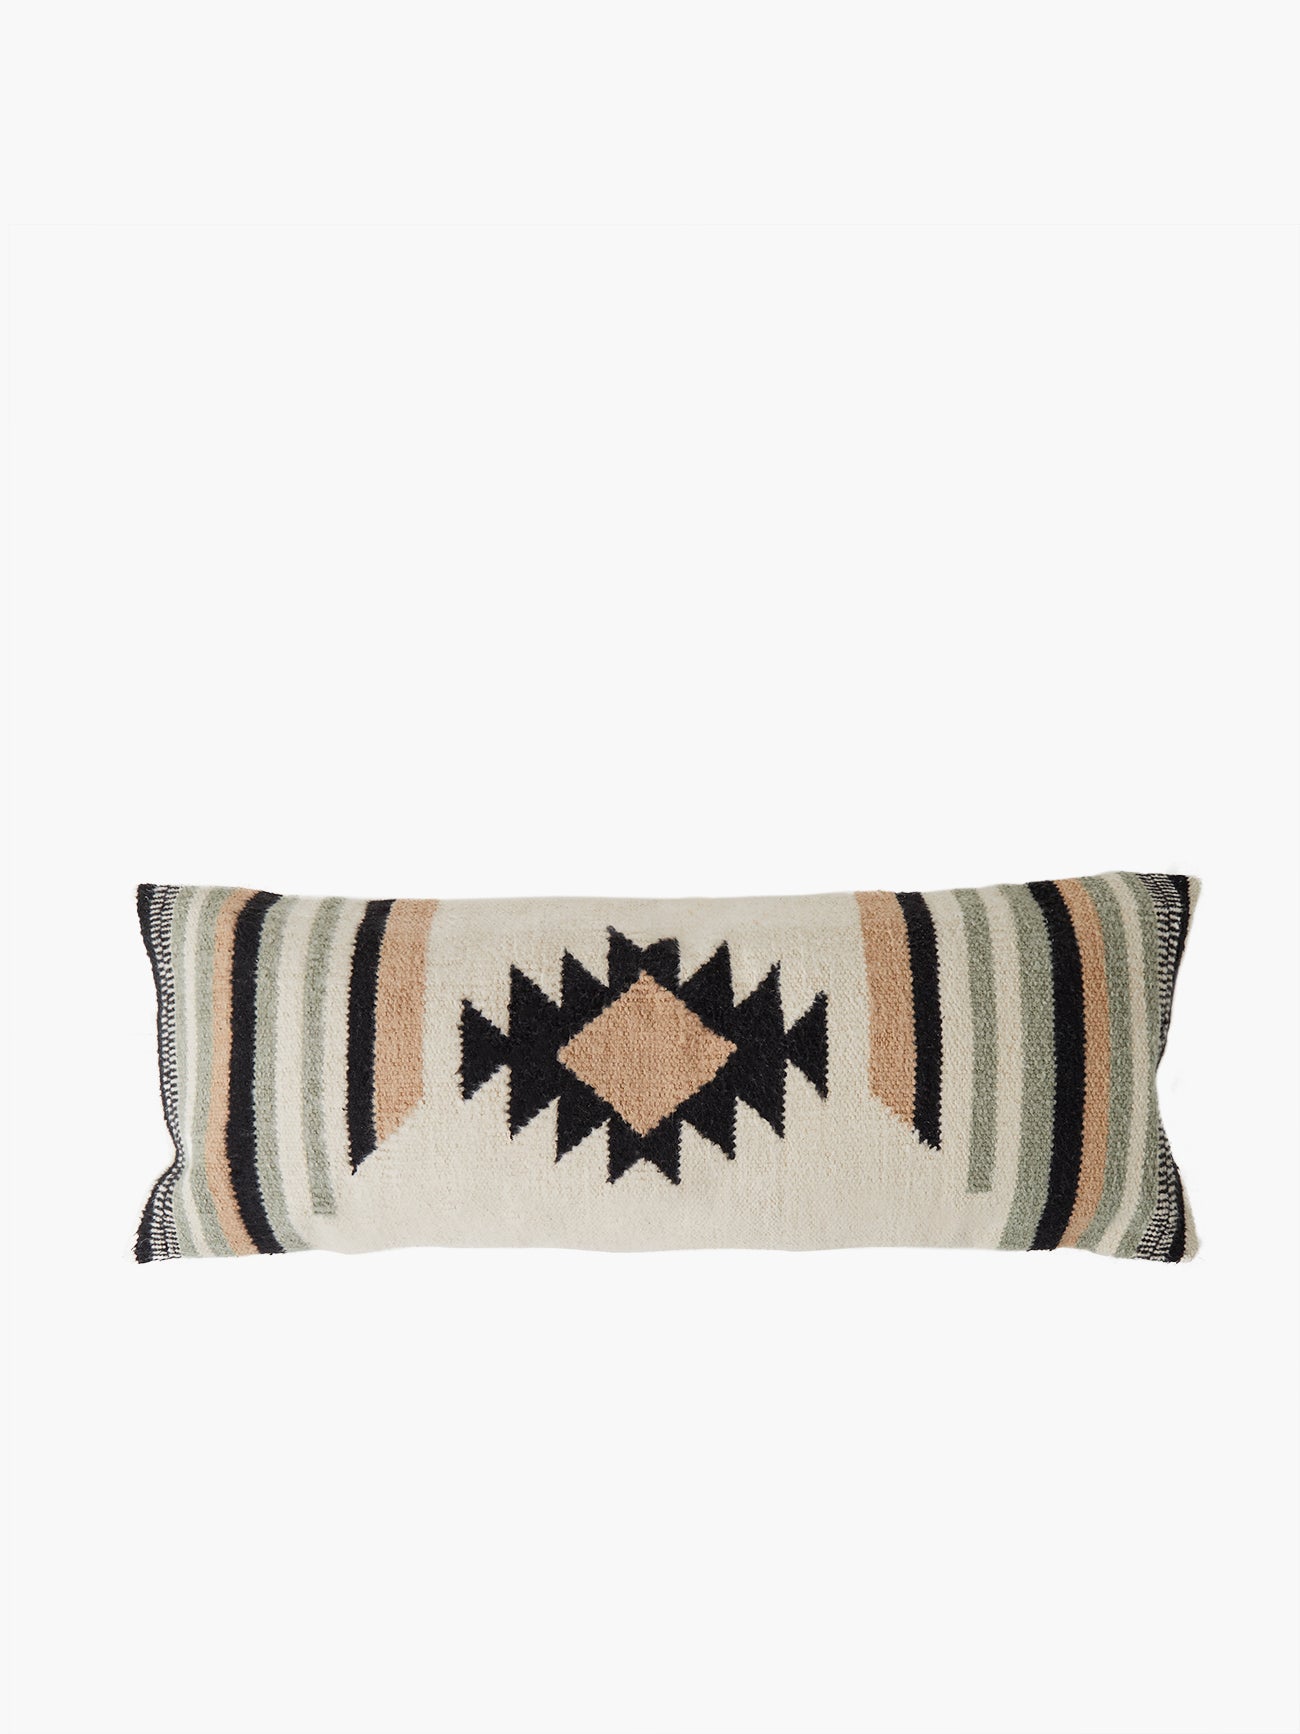 French Connection - Pastel Tribal Bolster Cushion | French Connection |  Chair & Sofa Cushions | One size - White/ Black - Size: OS